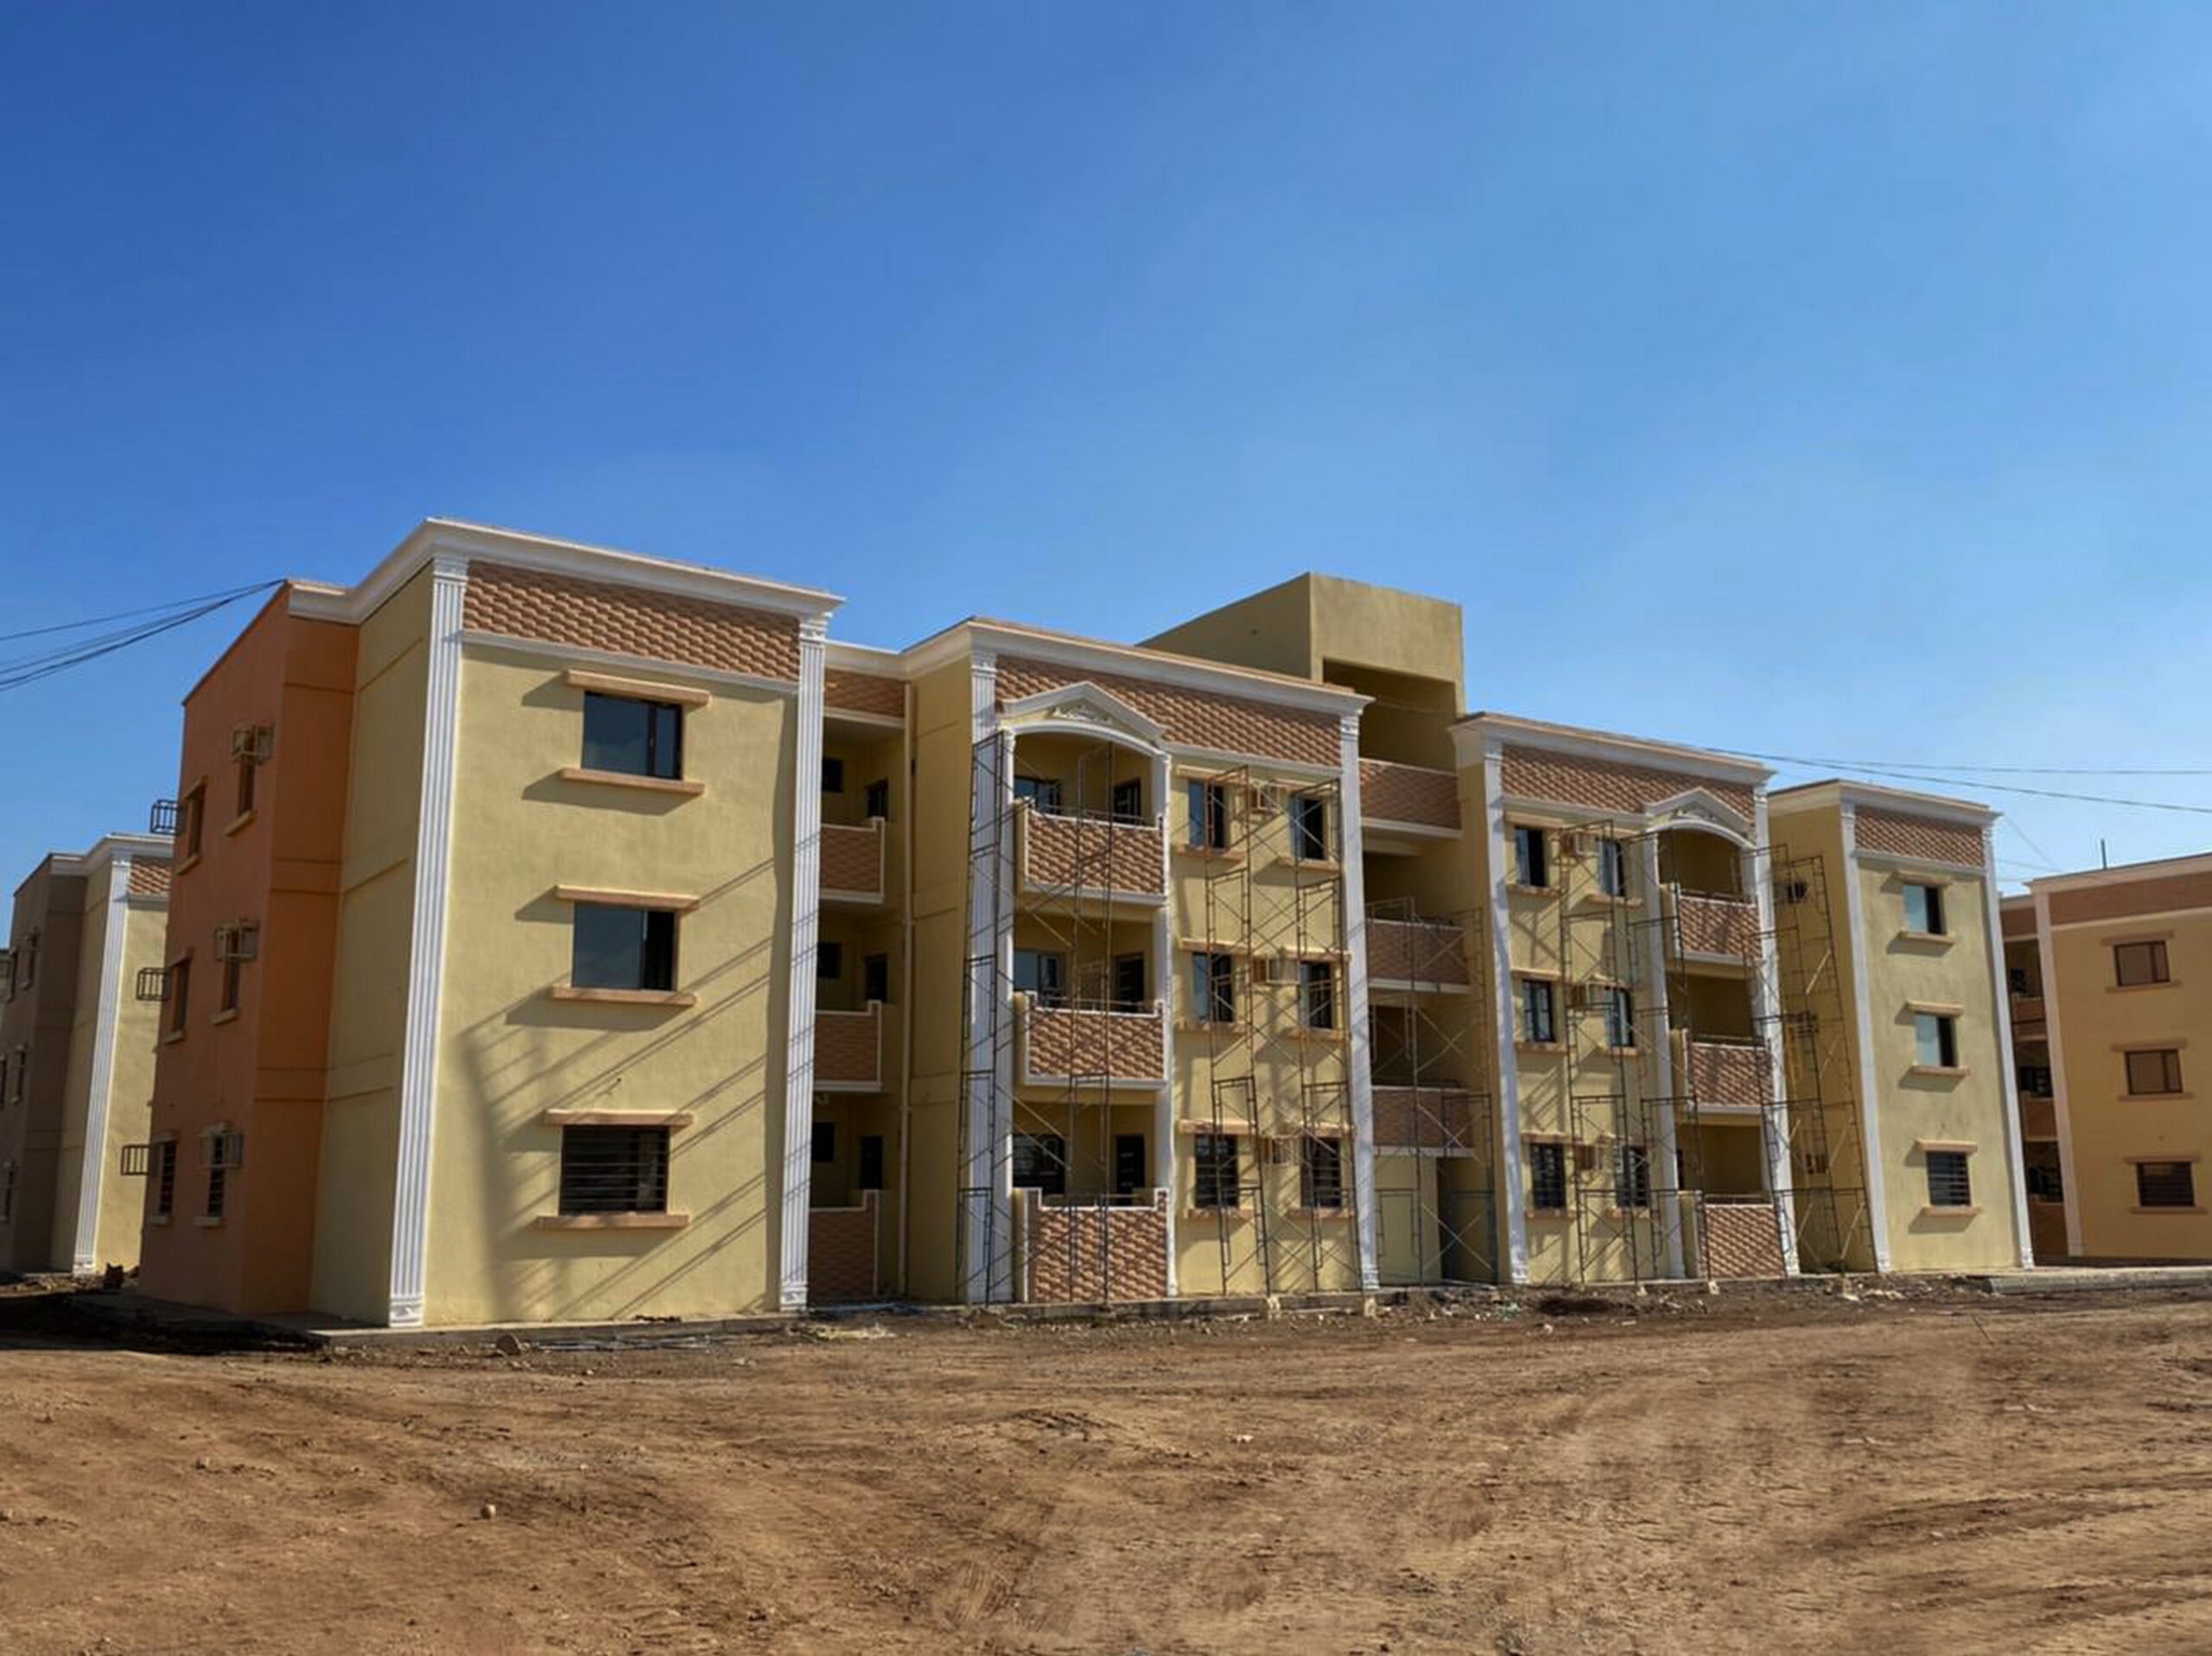 Al-Ghalibia housing project in Diyala governorate